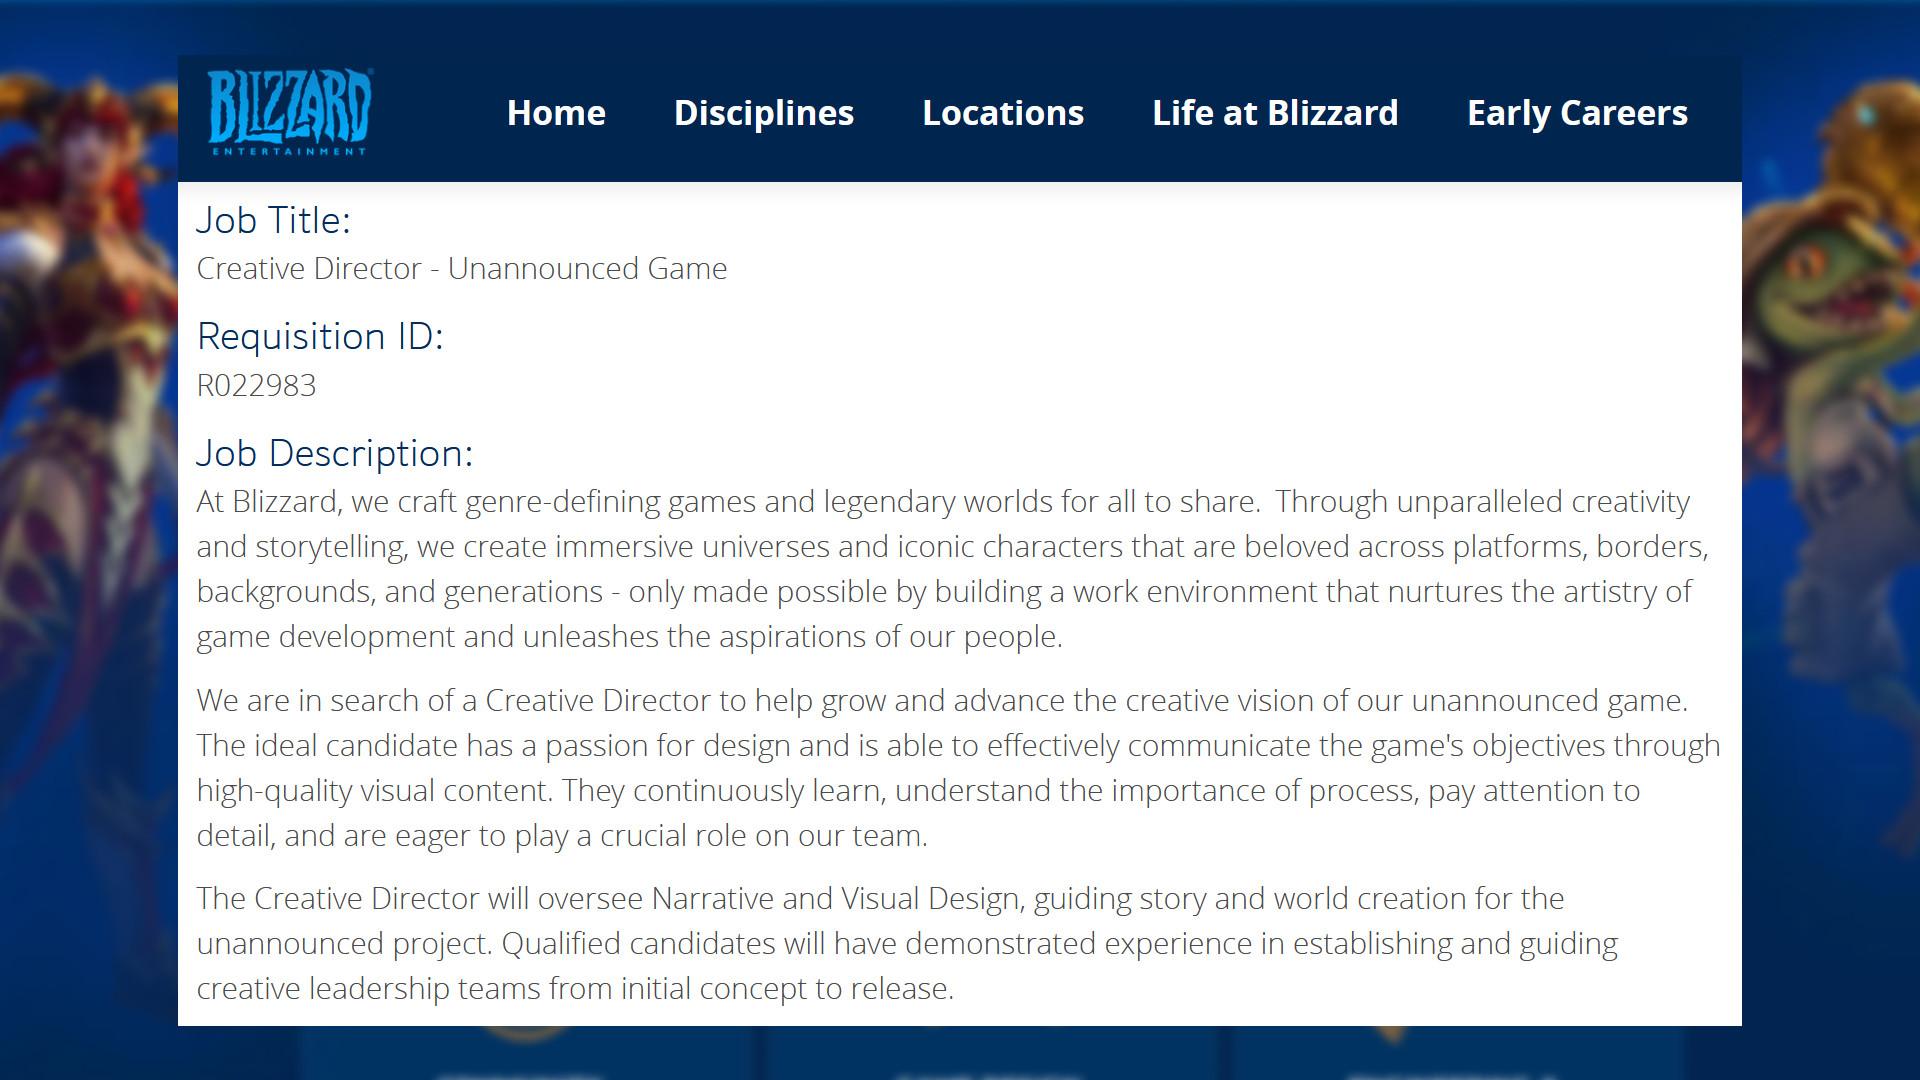 Job posting from Blizzard Entertainment: "Team Name: Unannounced Project / Job Title: Creative Director - Unannounced Game / Job Description: At Blizzard, we craft genre-defining games and legendary worlds for all to share.  Through unparalleled creativity and storytelling, we create immersive universes and iconic characters that are beloved across platforms, borders, backgrounds, and generations - only made possible by building a work environment that nurtures the artistry of game development and unleashes the aspirations of our people. We are in search of a Creative Director to help grow and advance the creative vision of our unannounced game. The ideal candidate has a passion for design and is able to effectively communicate the game's objectives through high-quality visual content. They continuously learn, understand the importance of process, pay attention to detail, and are eager to play a crucial role on our team. The Creative Director will oversee Narrative and Visual Design, guiding story and world creation for the unannounced project. Qualified candidates will have demonstrated experience in establishing and guiding creative leadership teams from initial concept to release."